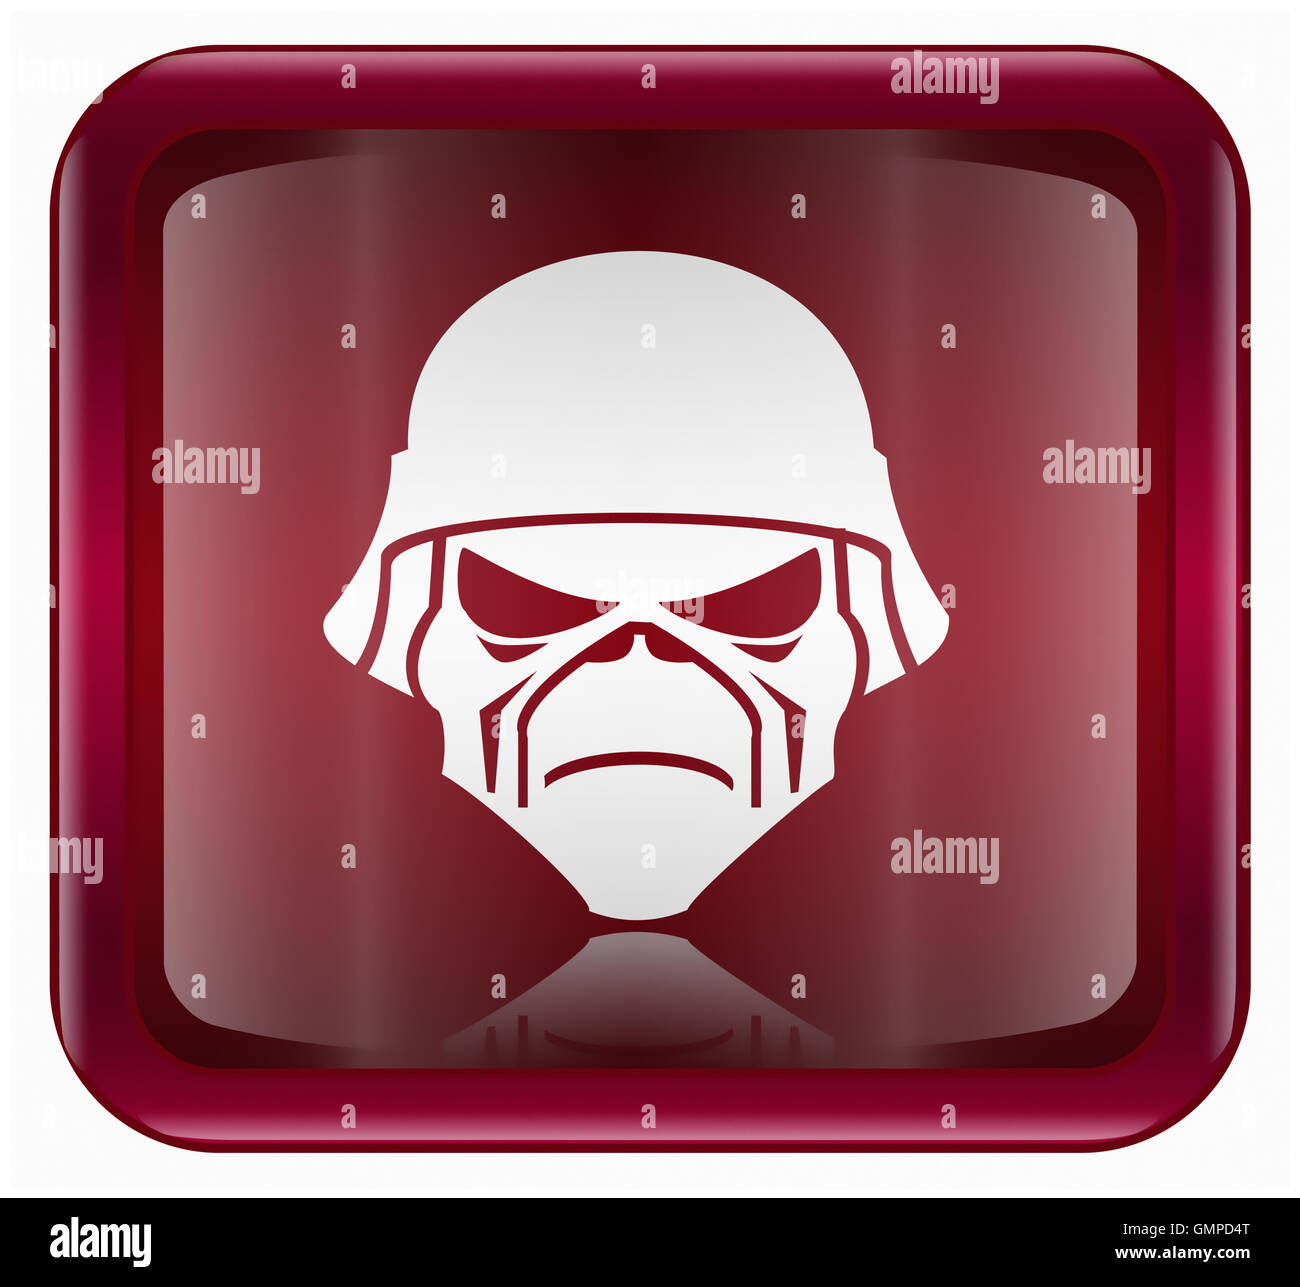 Army button dark red, isolated on white background Stock Photo